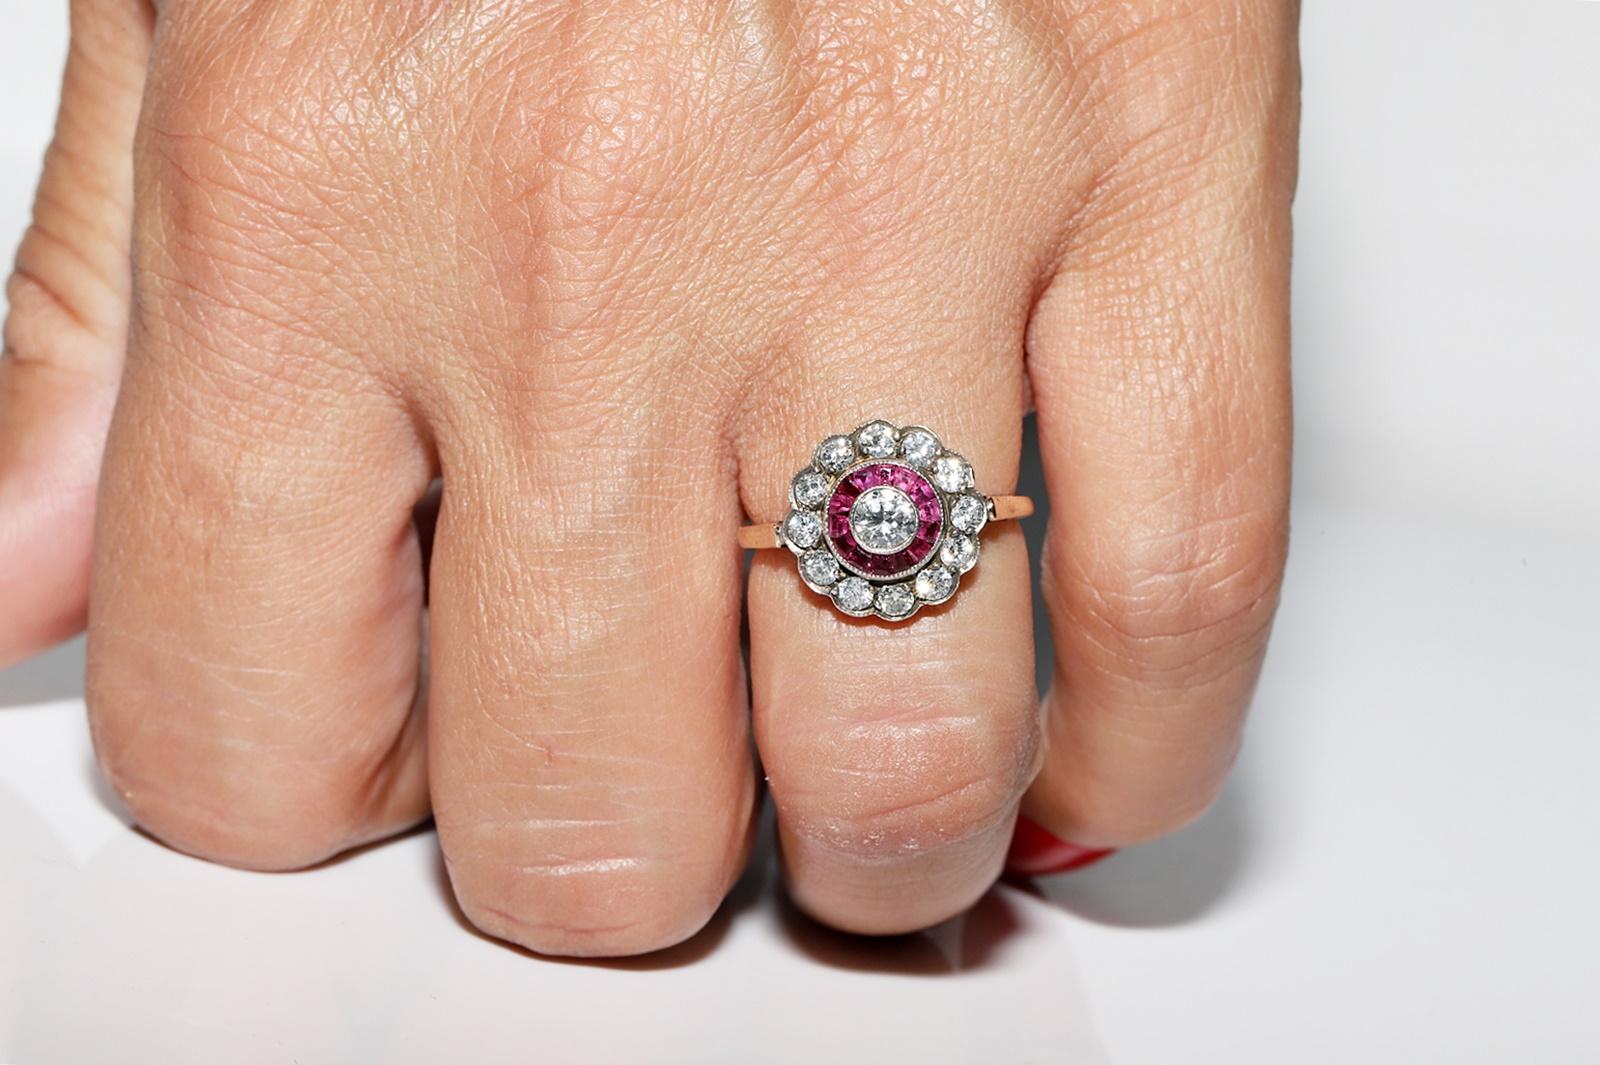 Old Original Vintage Circa 1980s 14k Gold Natural Diamond And Caliber Ruby Ring For Sale 8